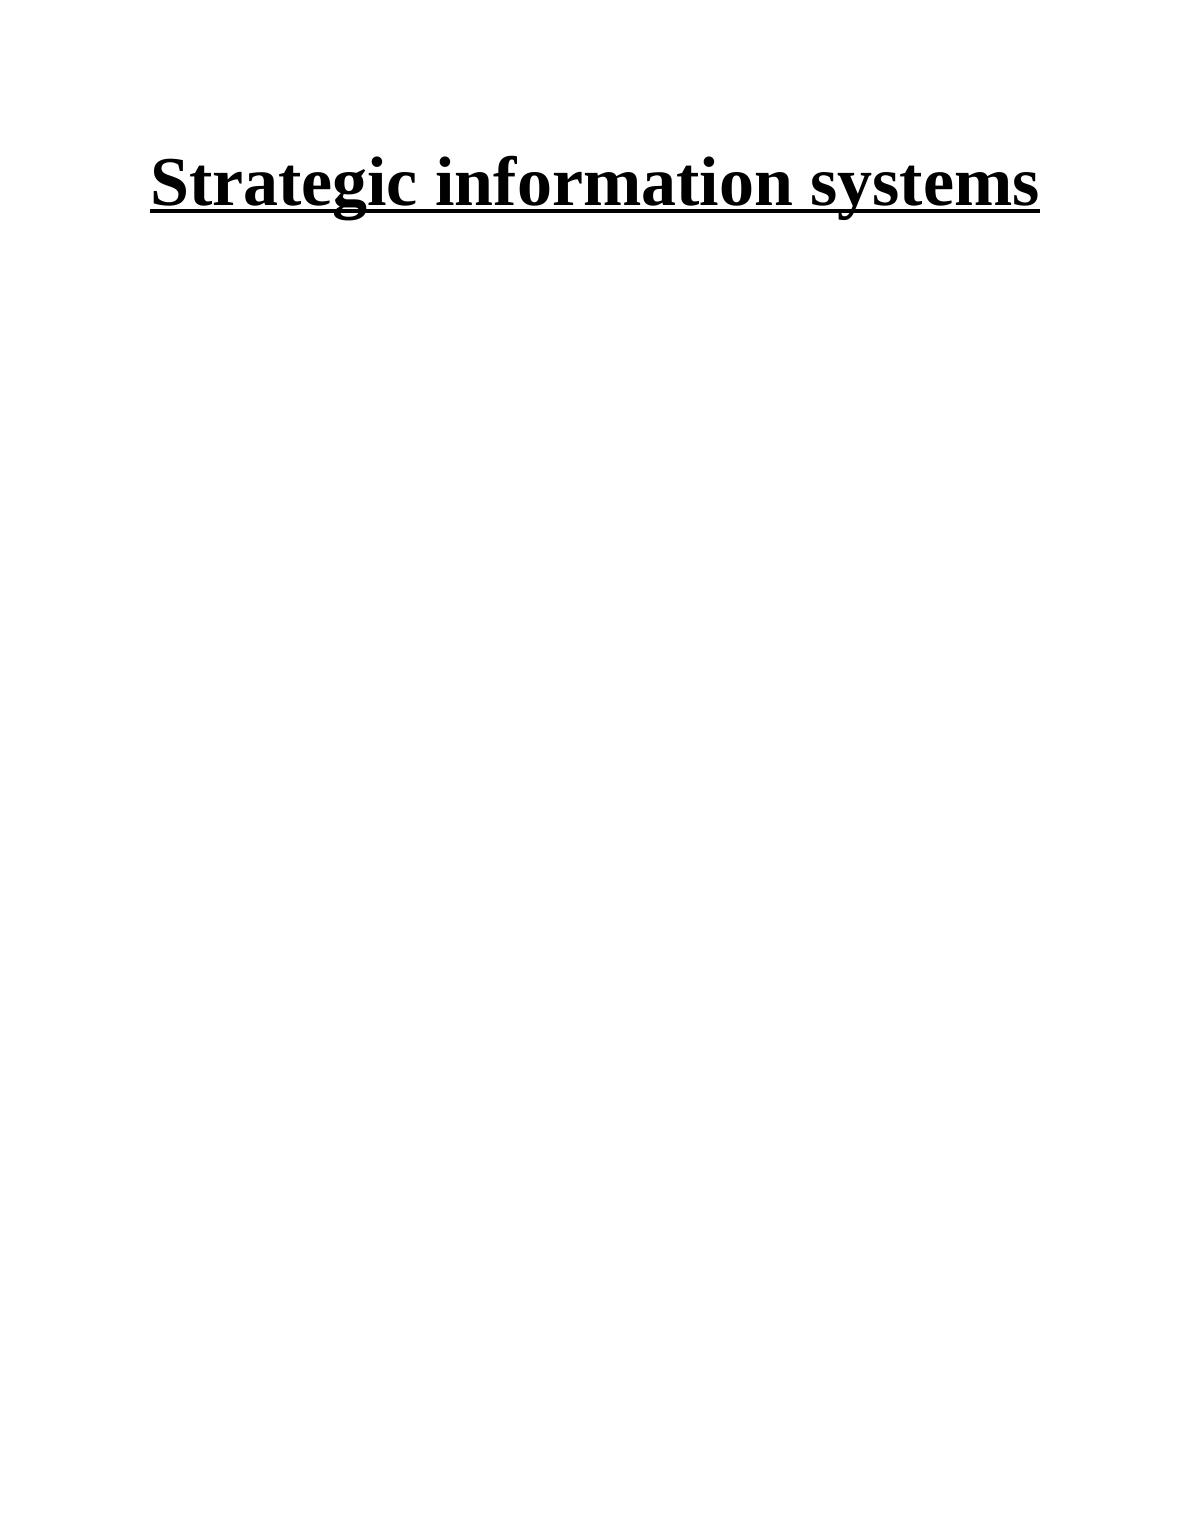 Strategic Information Systems Solved Assignment_1